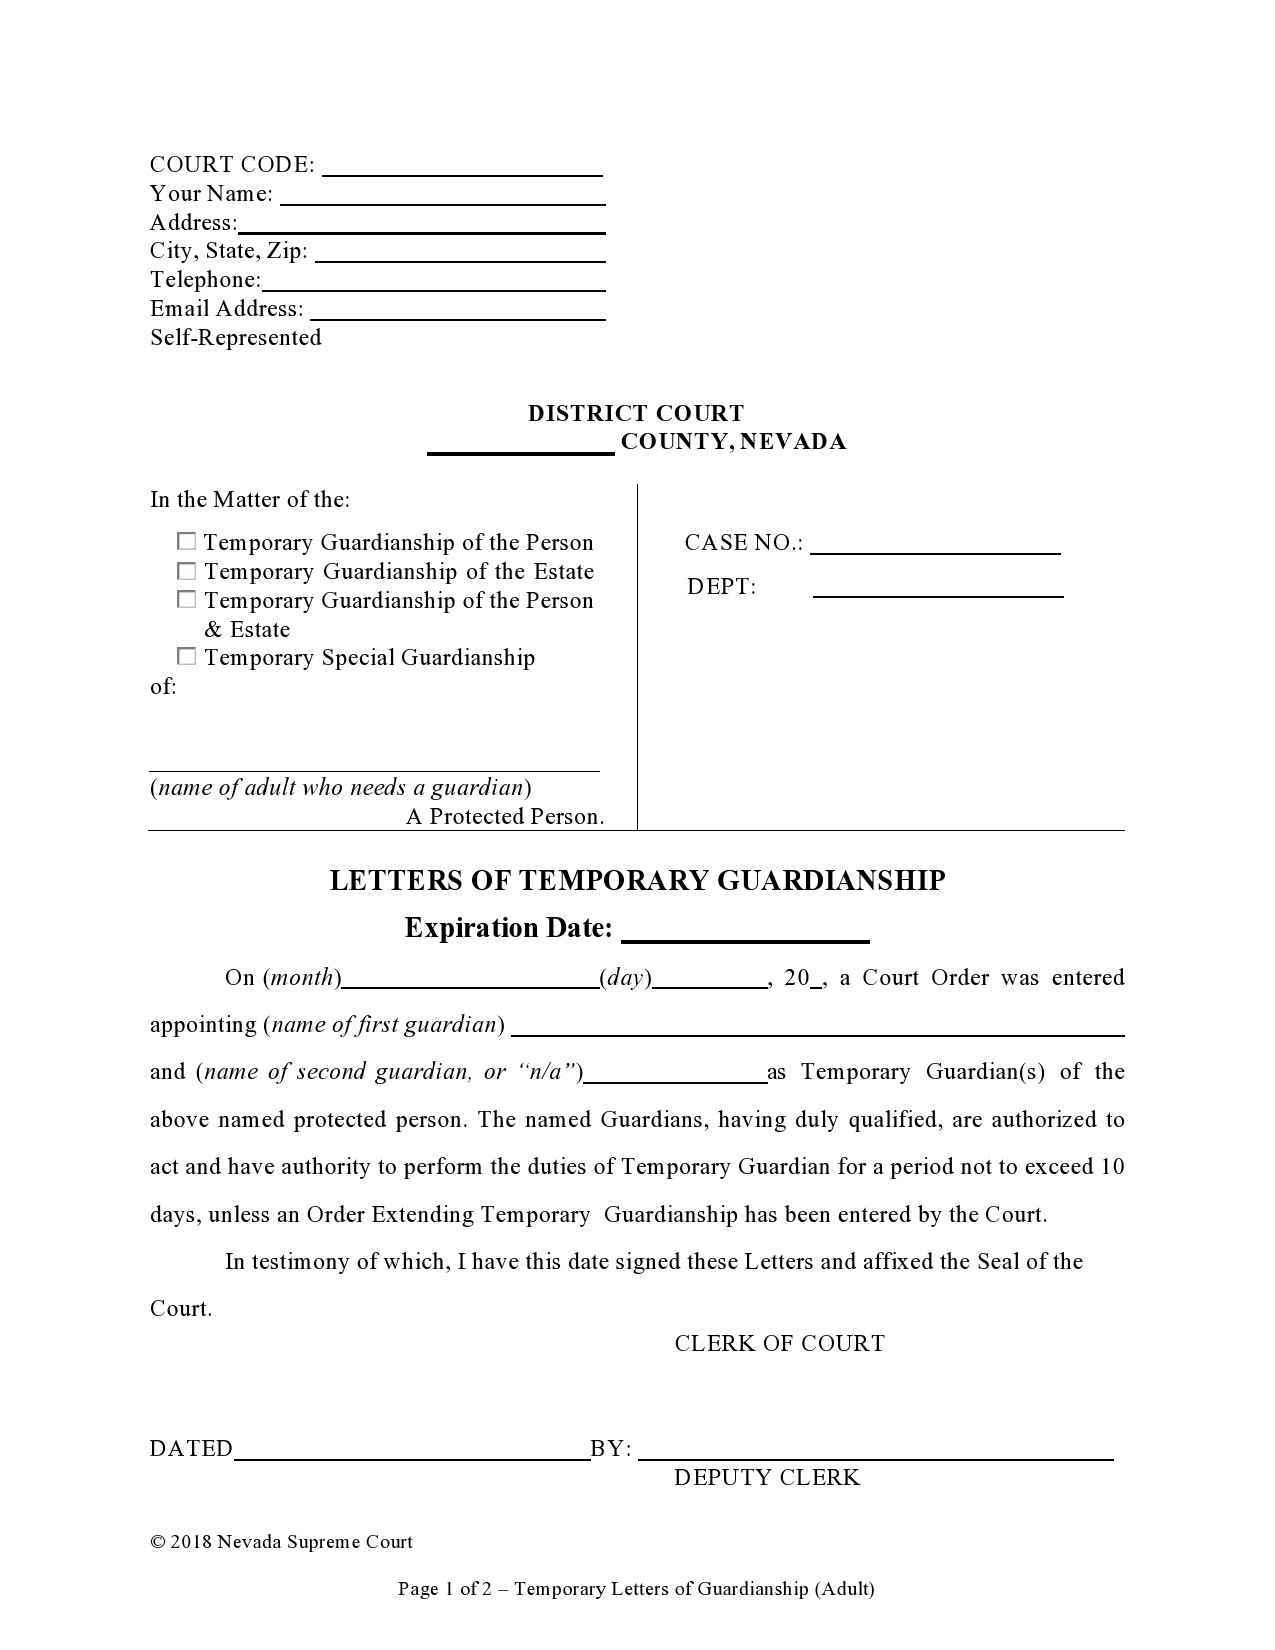 40-printable-temporary-guardianship-forms-all-states